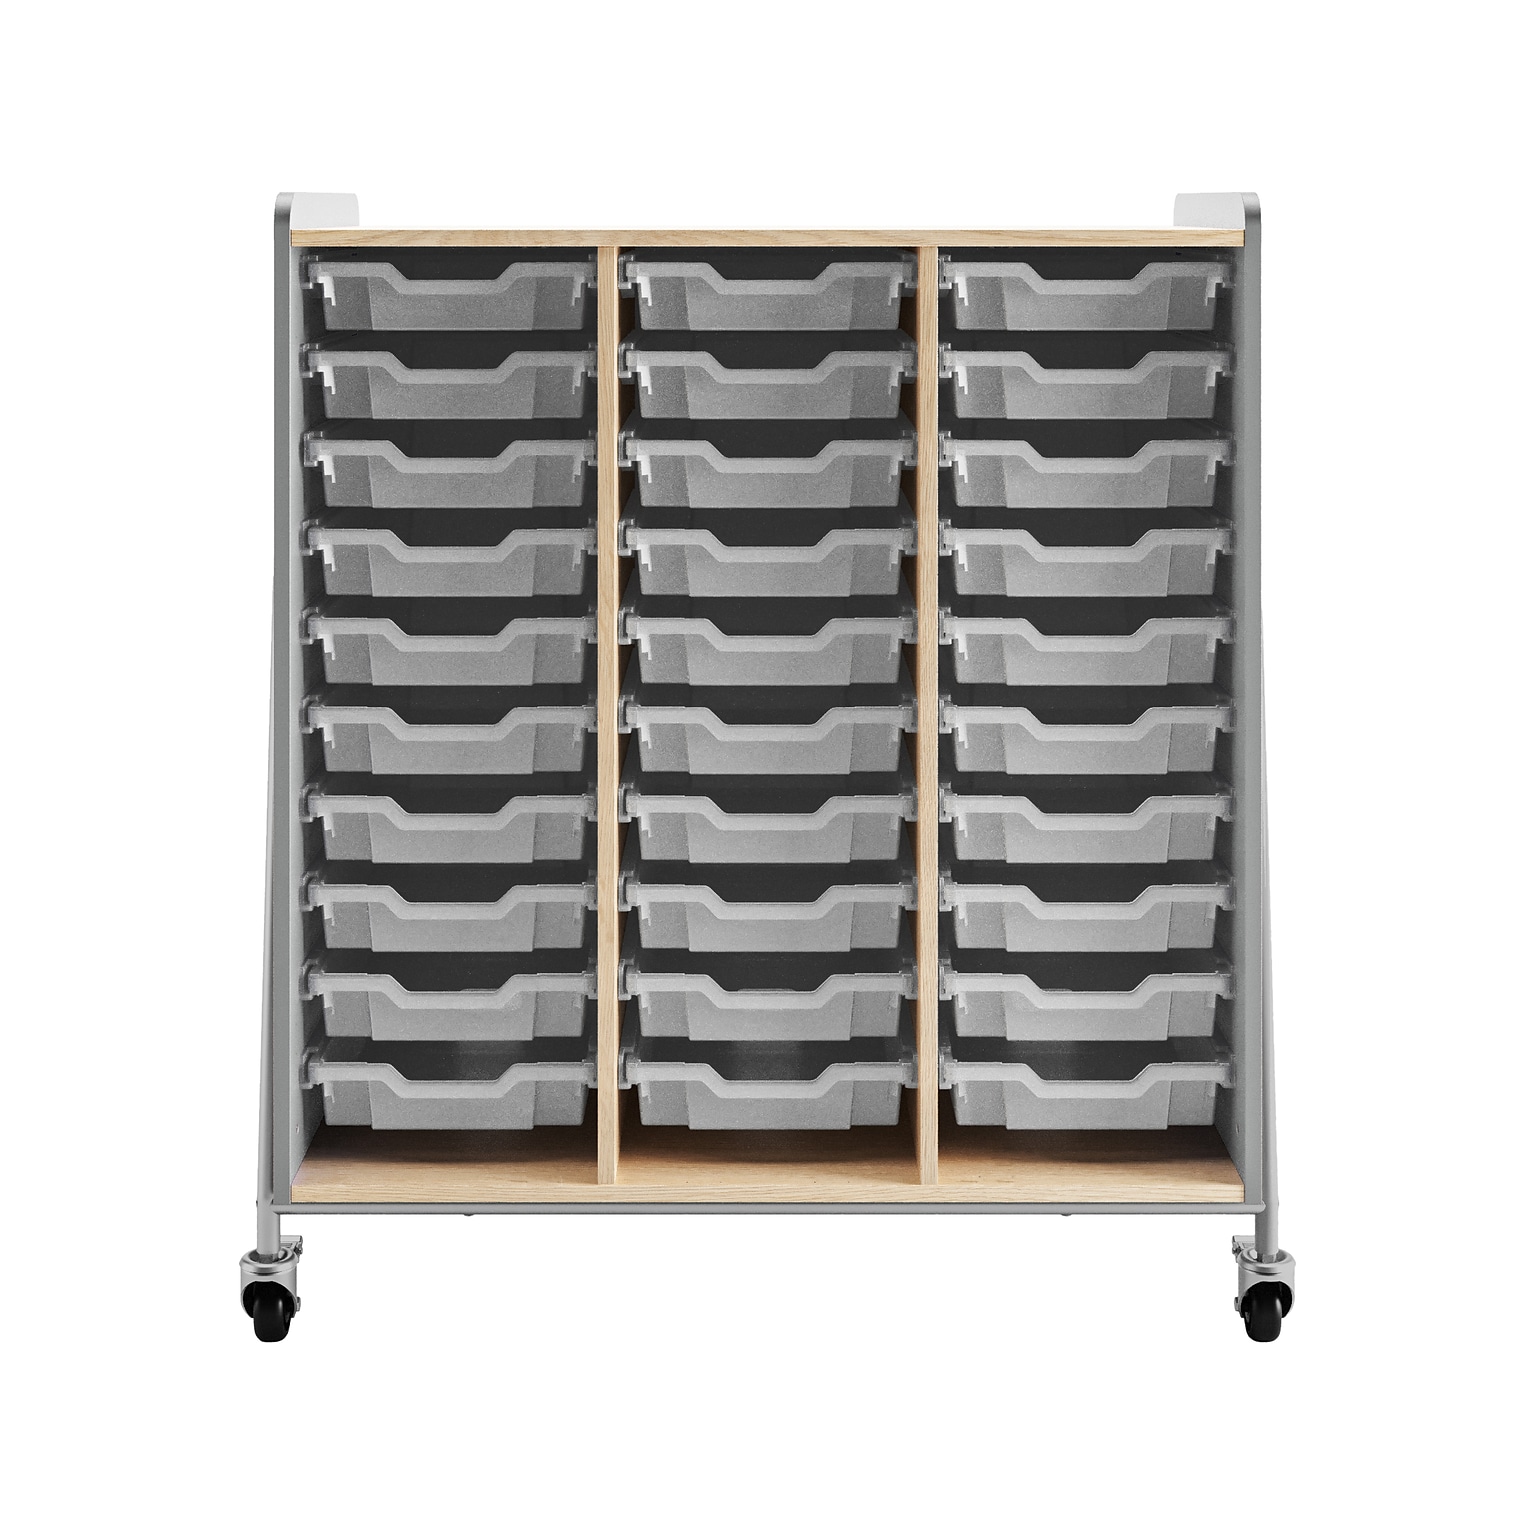 Safco Whiffle Typical 10 48 x 43 Particle Board Triple-Column Mobile Storage, Gray (3930GRY)